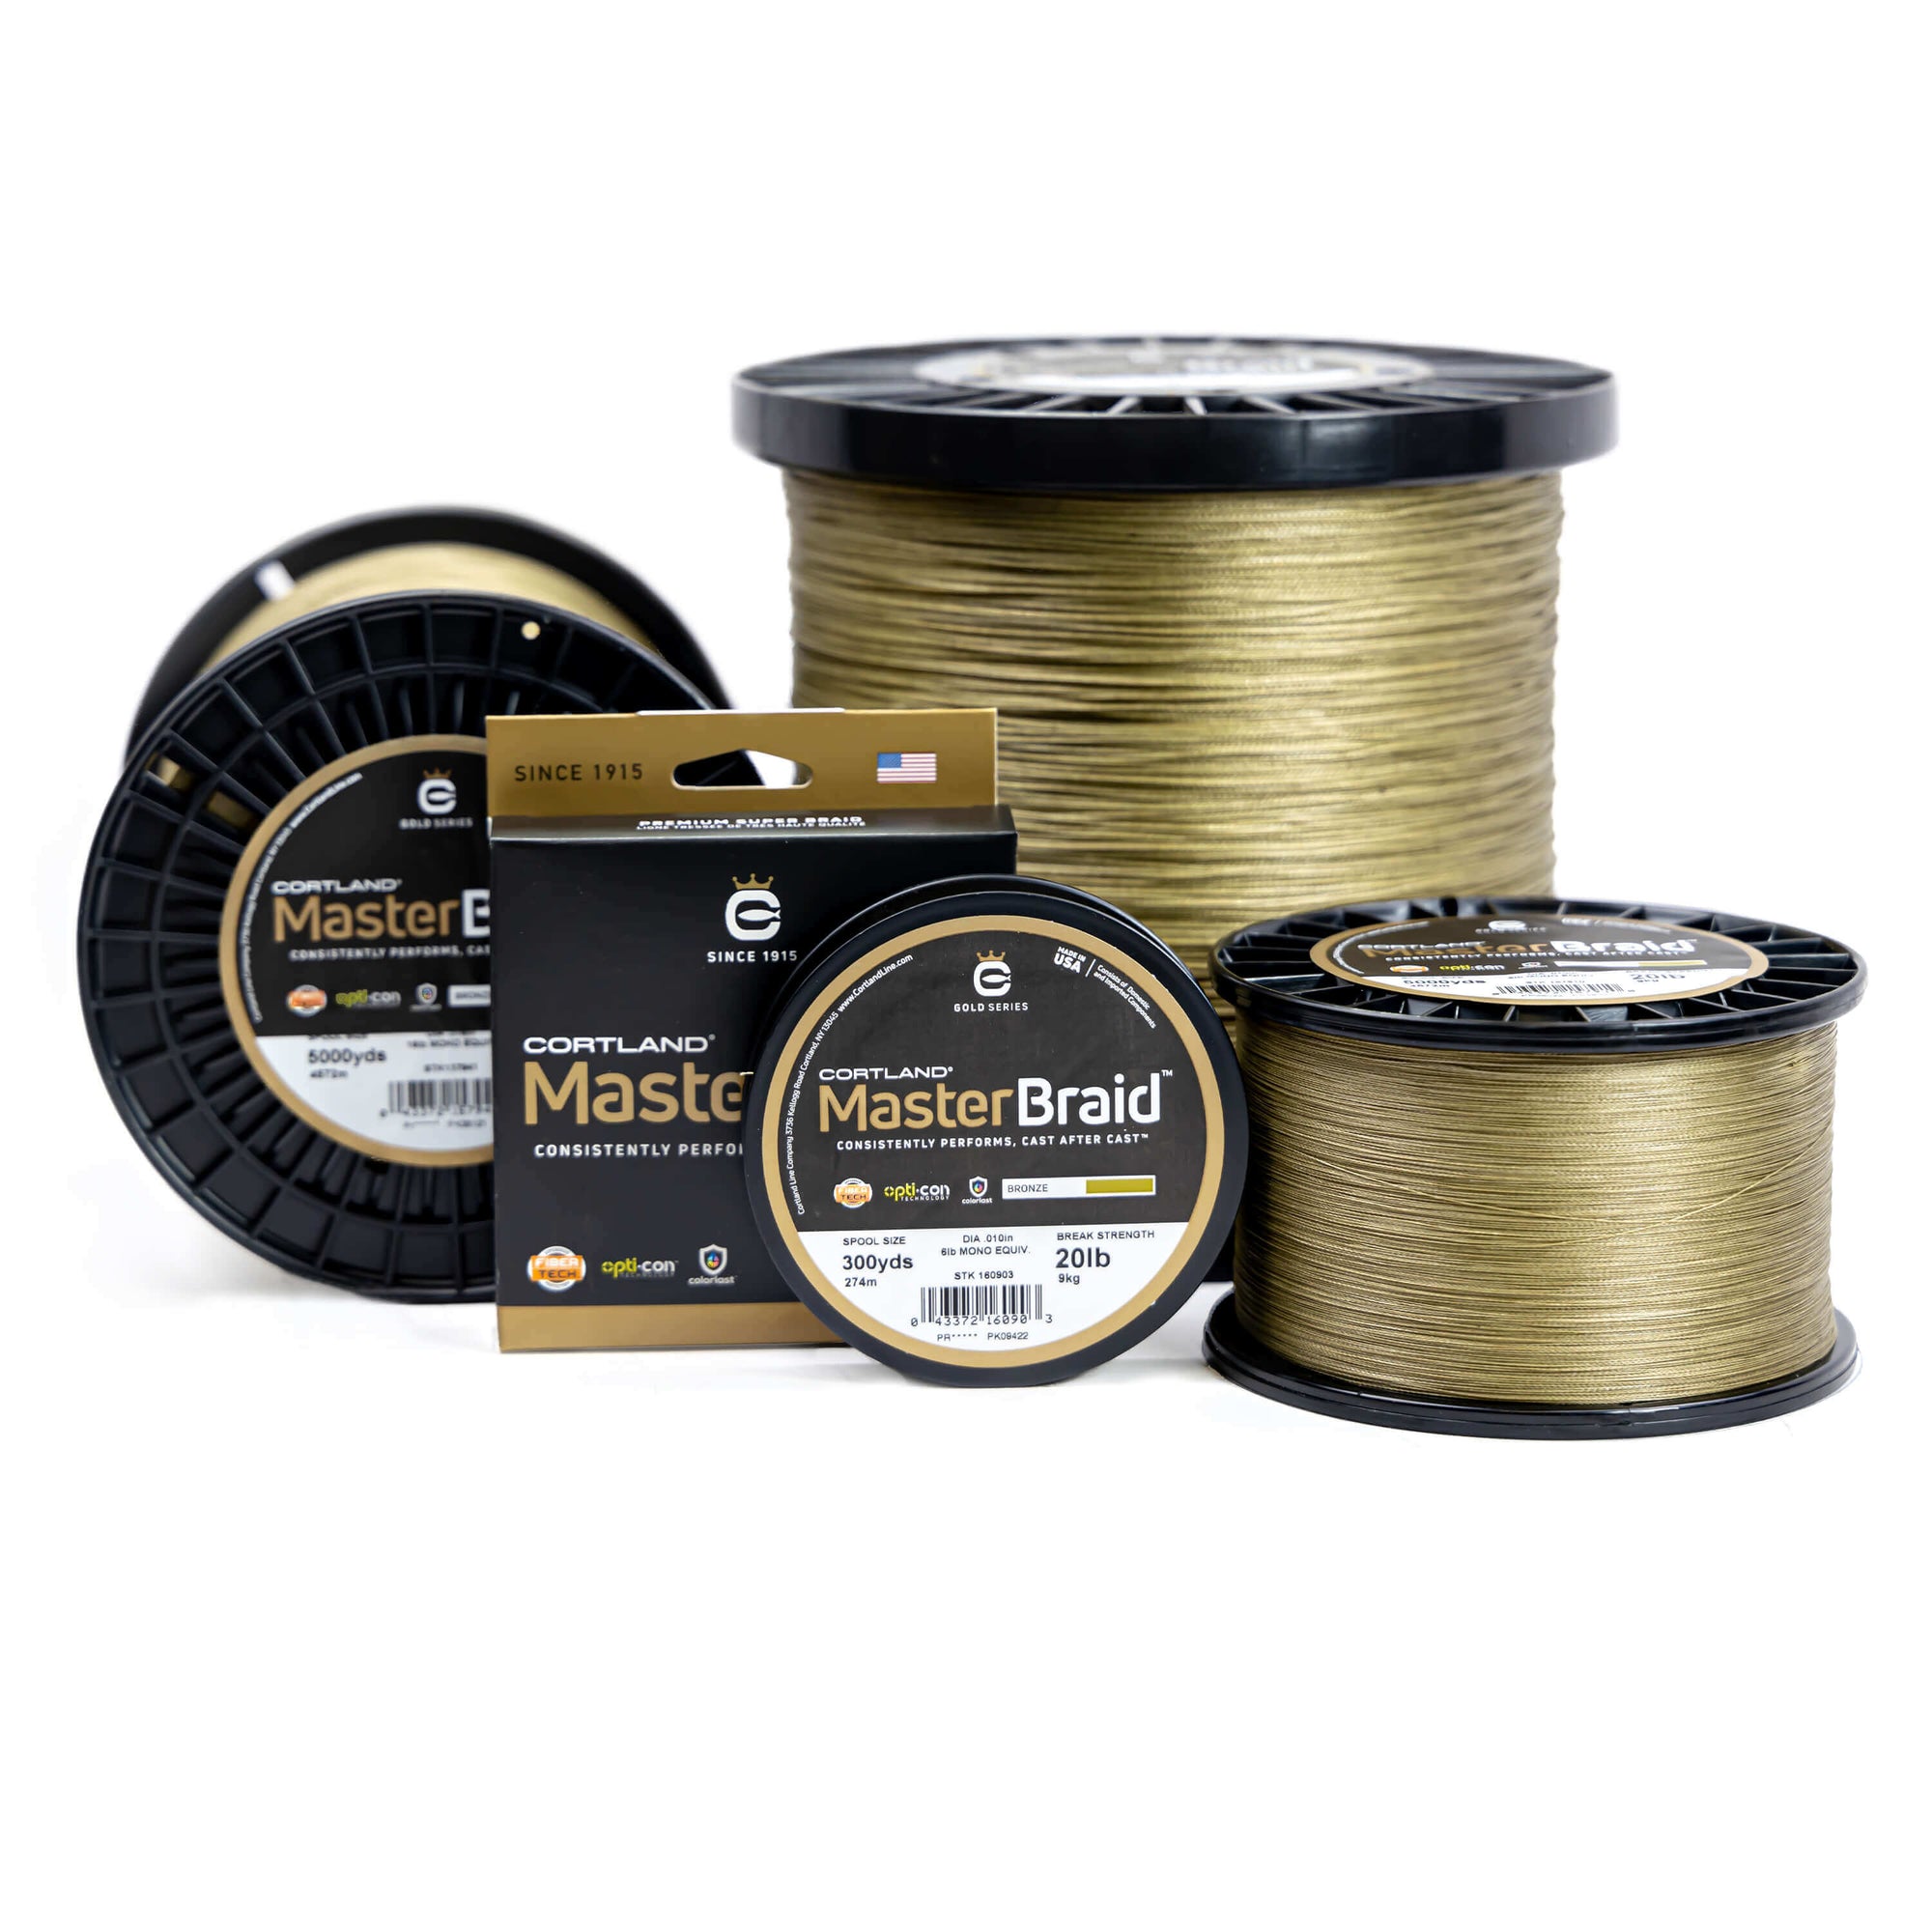 Cortland Master Braid - Bronze fishing line. There is four different spools in different sizes and there is one in a box.